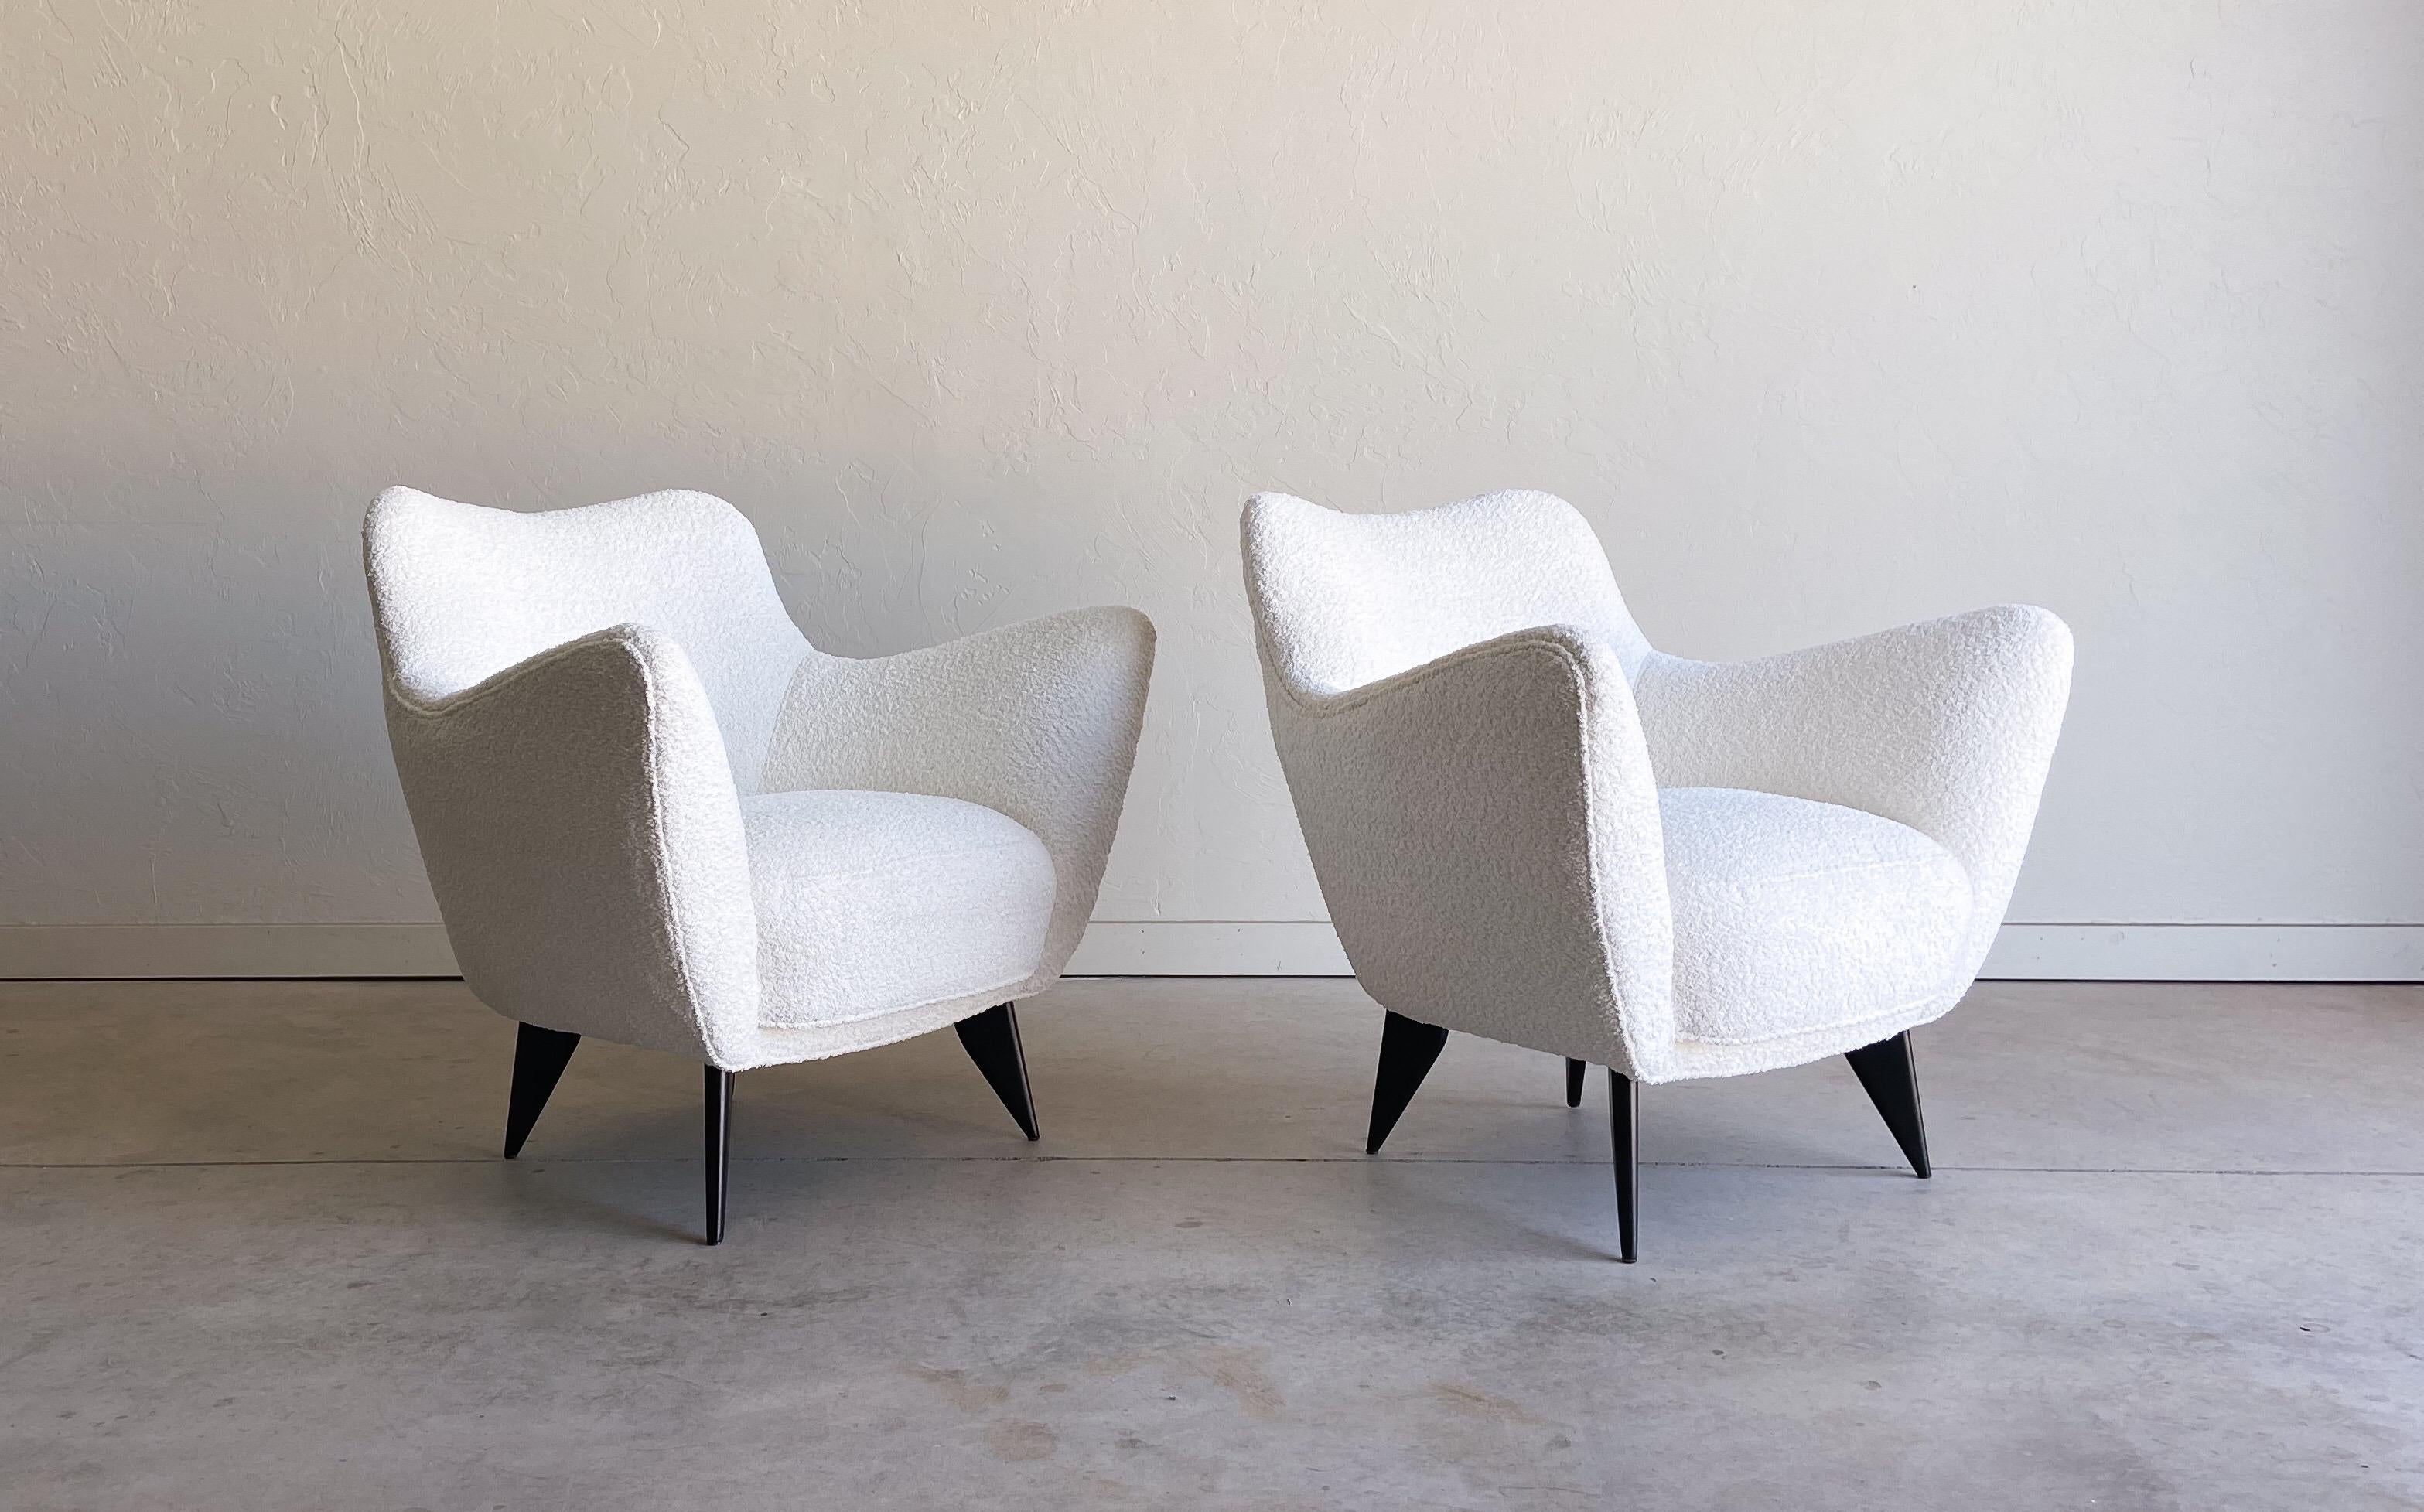 A lovely and rare pair of organic lounge chairs or armchairs designed by Giulia Veronesi. Produced by ISA Bergamo in the 1950’s. 

These chairs feature a wonderful organic design that is as much art as it is function. These are quite comfortable.